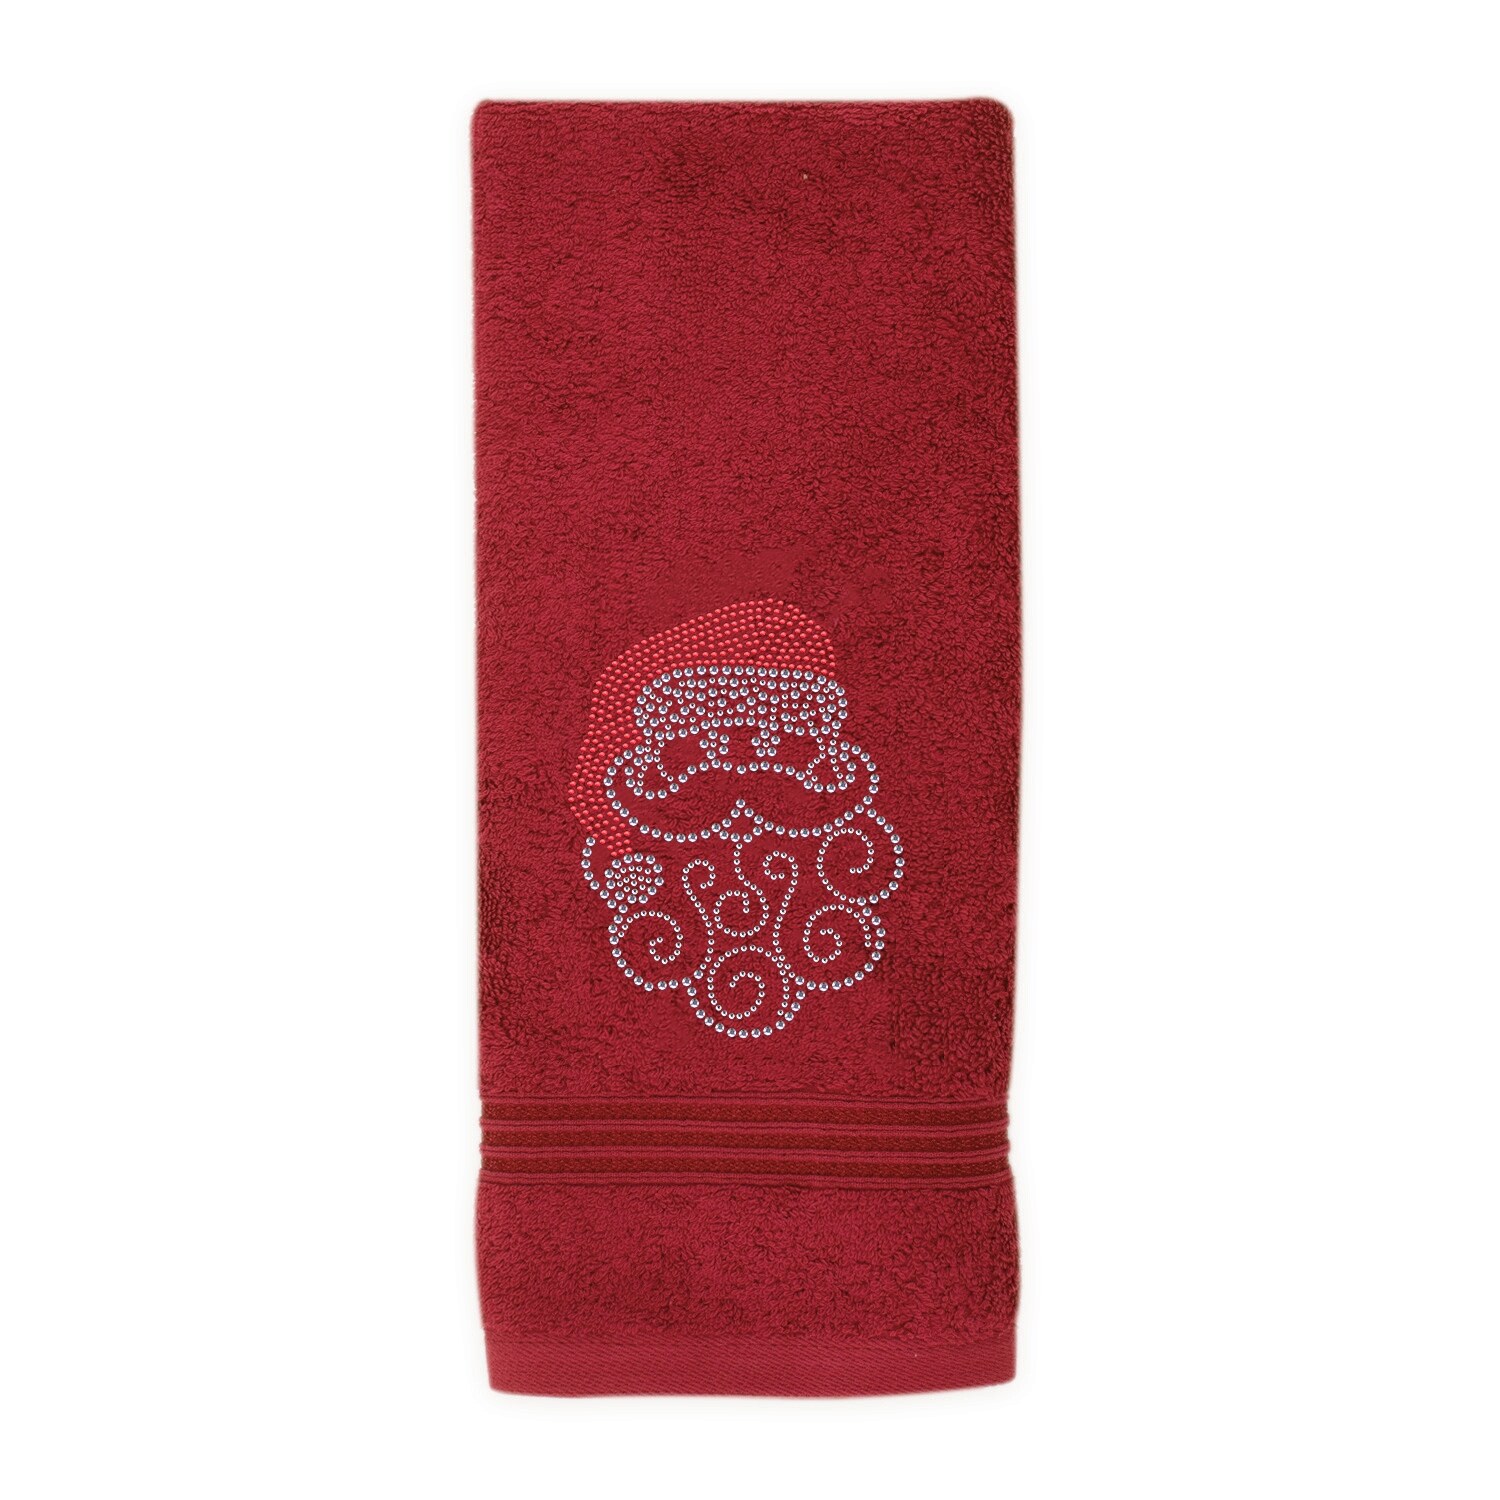 https://ak1.ostkcdn.com/images/products/is/images/direct/70ba14c3a6d9fc7f81ec41d851c6c7f30803279a/Sparkles-Home-Rhinestone-Santa-Hand-Towel.jpg